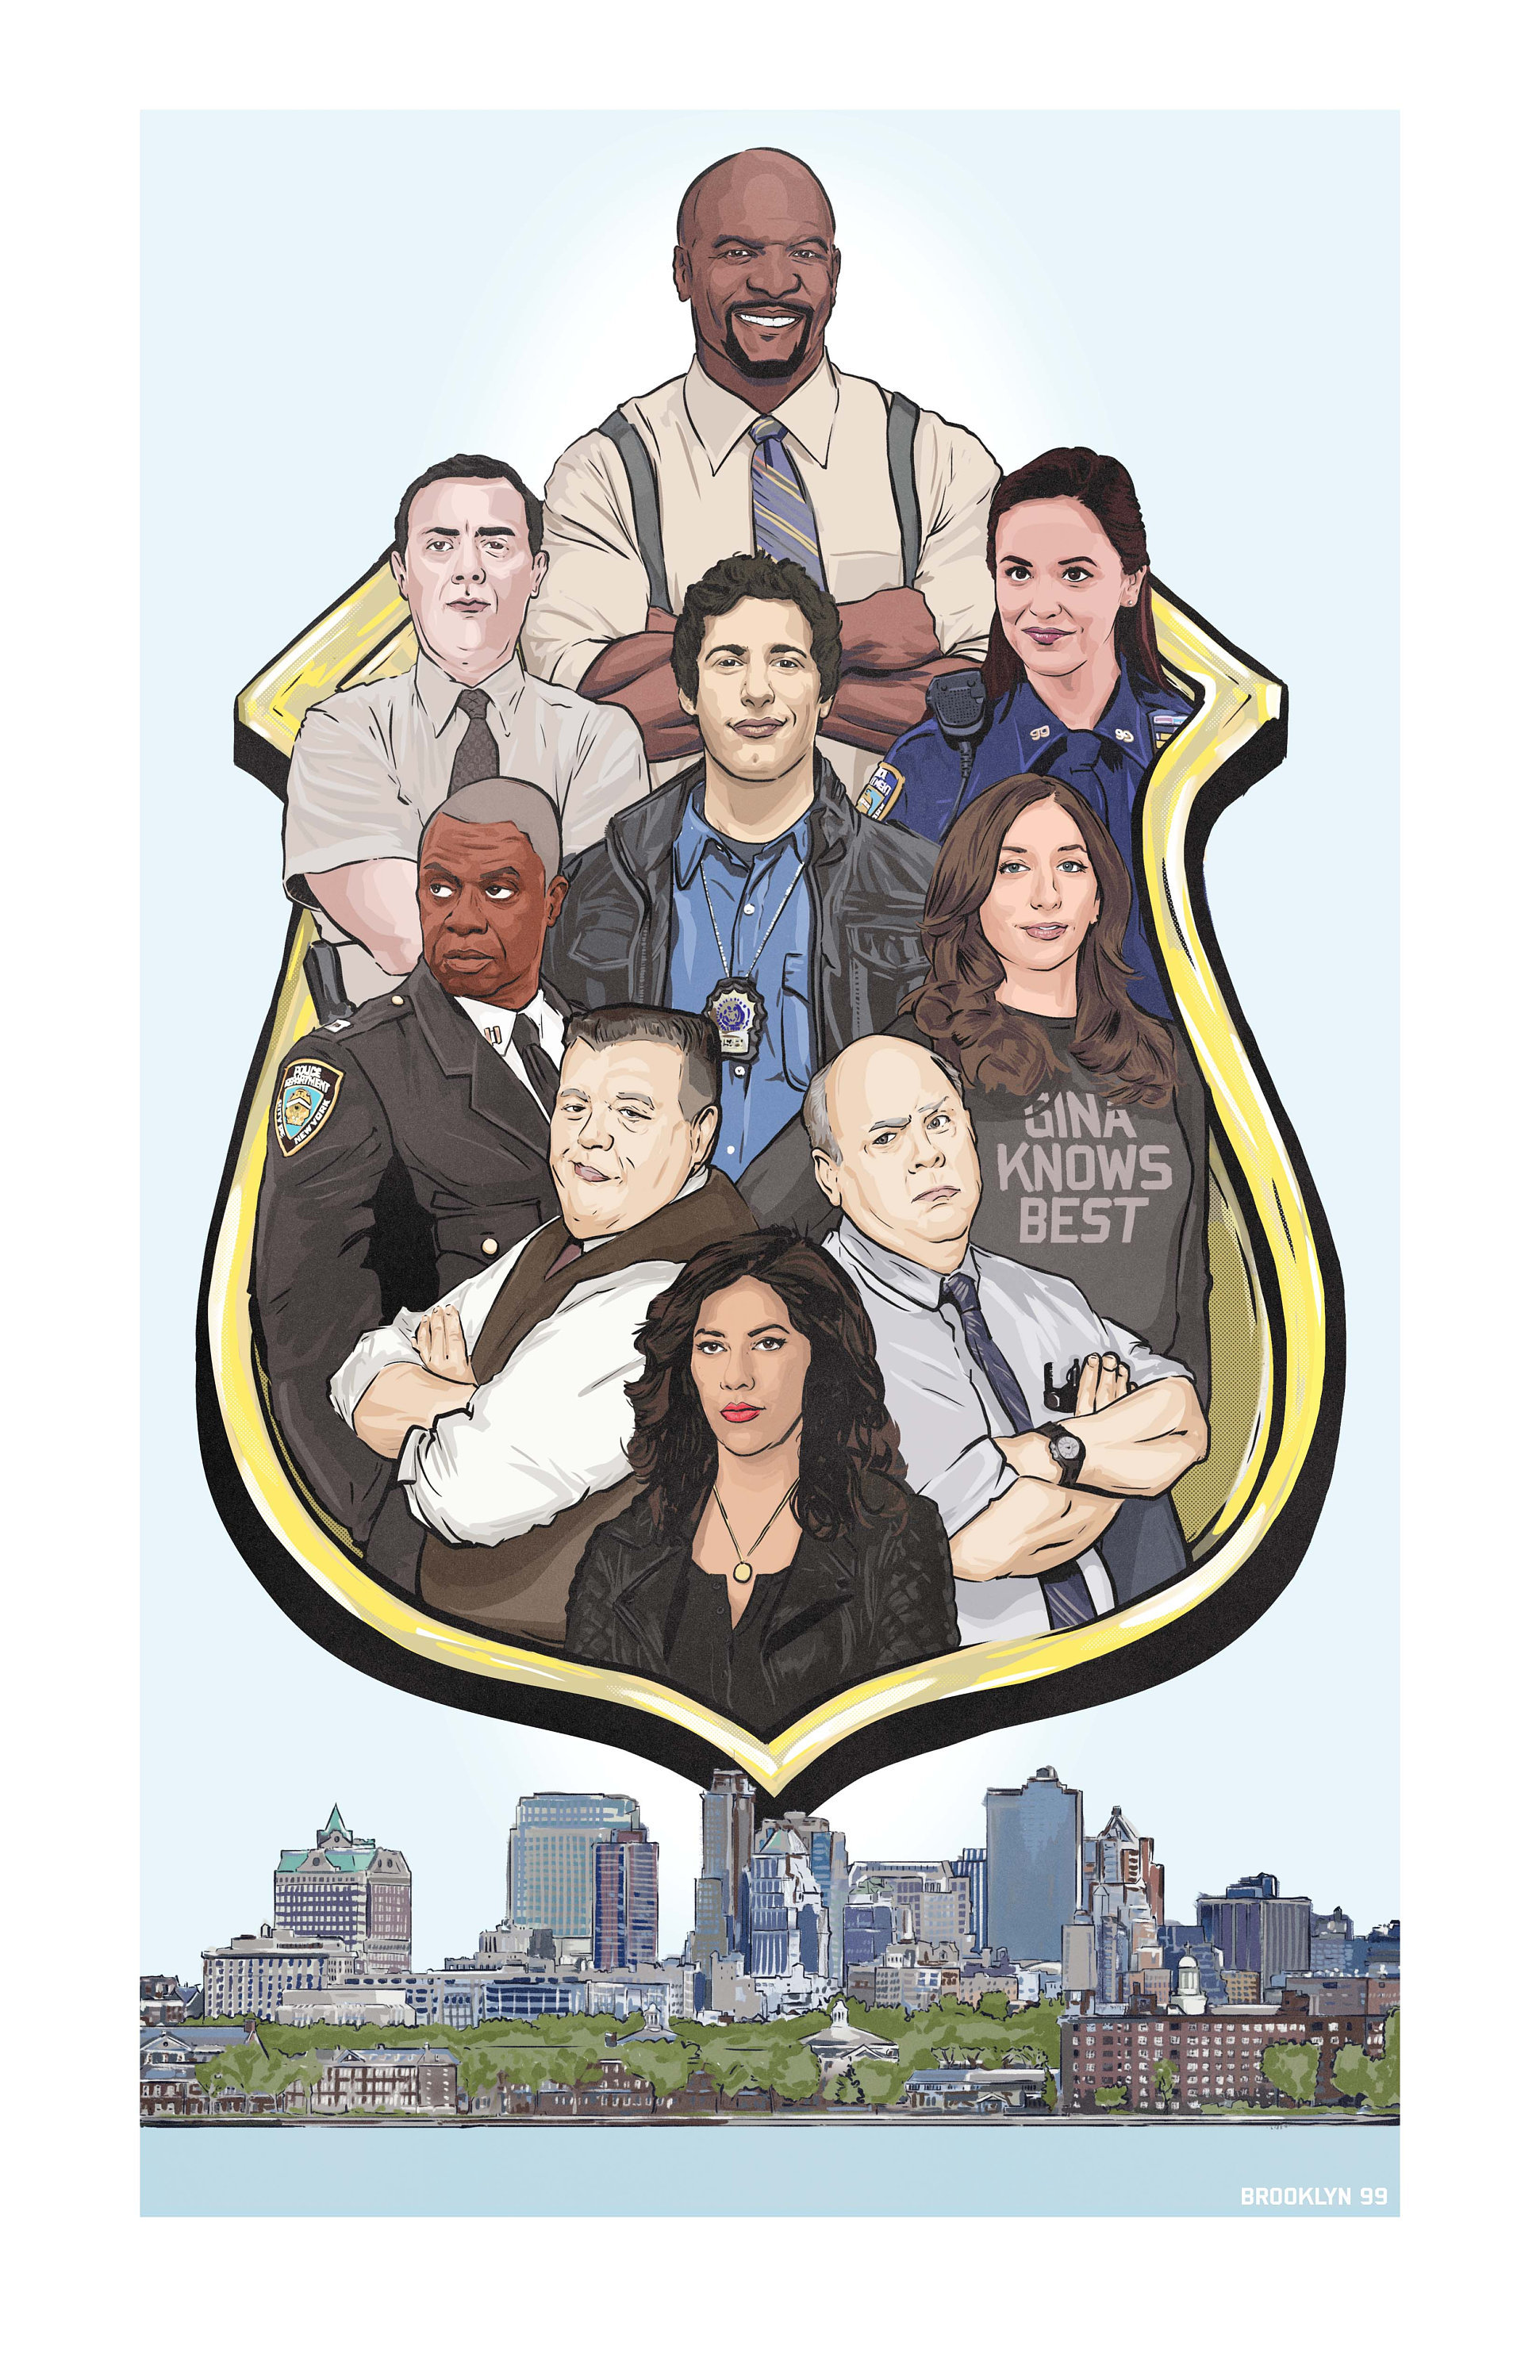 Brooklyn 99 Movie Poster Illustration // 11 by 17 Inches on Etsy